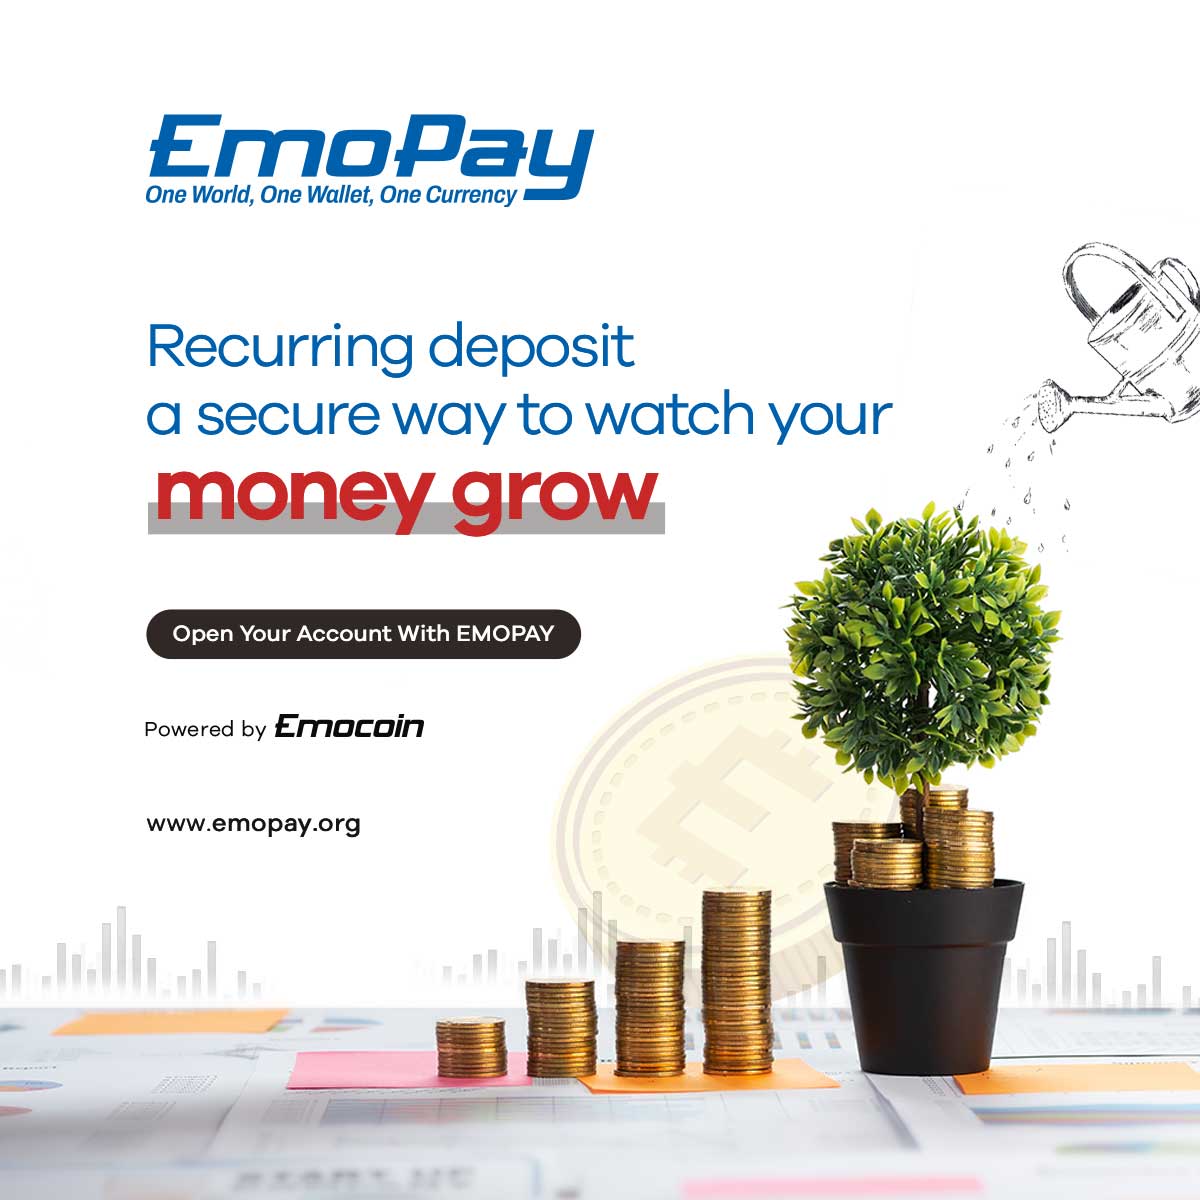 Choose Emopay's Recurring Deposit for a secure and reliable way to grow your savings.🌱💰

Start your account today at emopay.org

#Emopay #RecurringDeposit #investment #Emocoin #Crypto #MoneyManagement #FinancialPlanning #WealthBuilding #cryptocurrency #tuesdayvibe